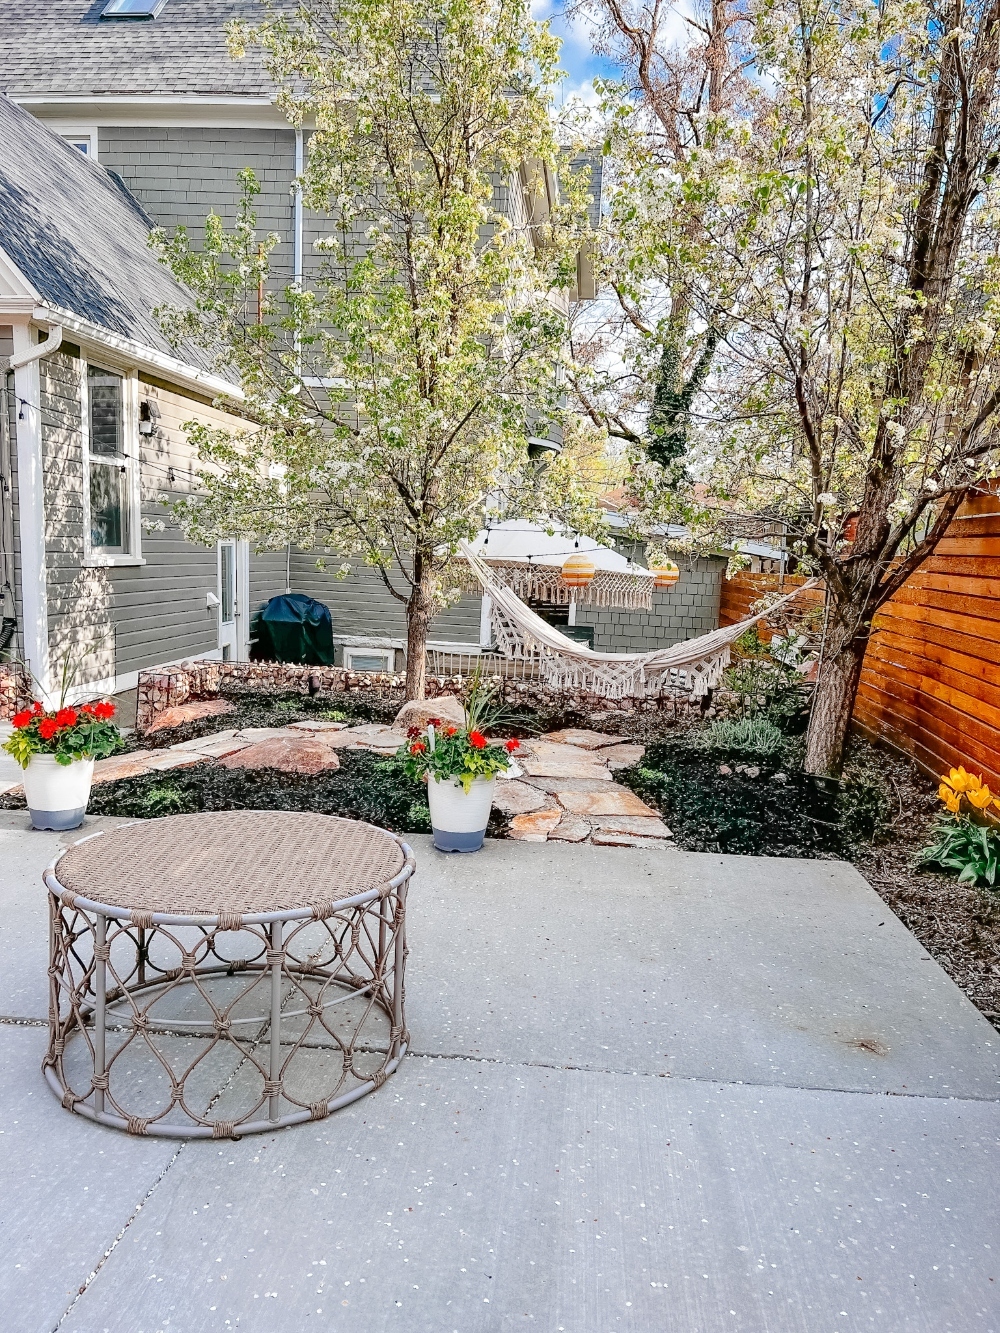 How to Make a Small Yard Seem Large. Ways to make every outdoor space have a purpose and work to make your small yard seem larger!